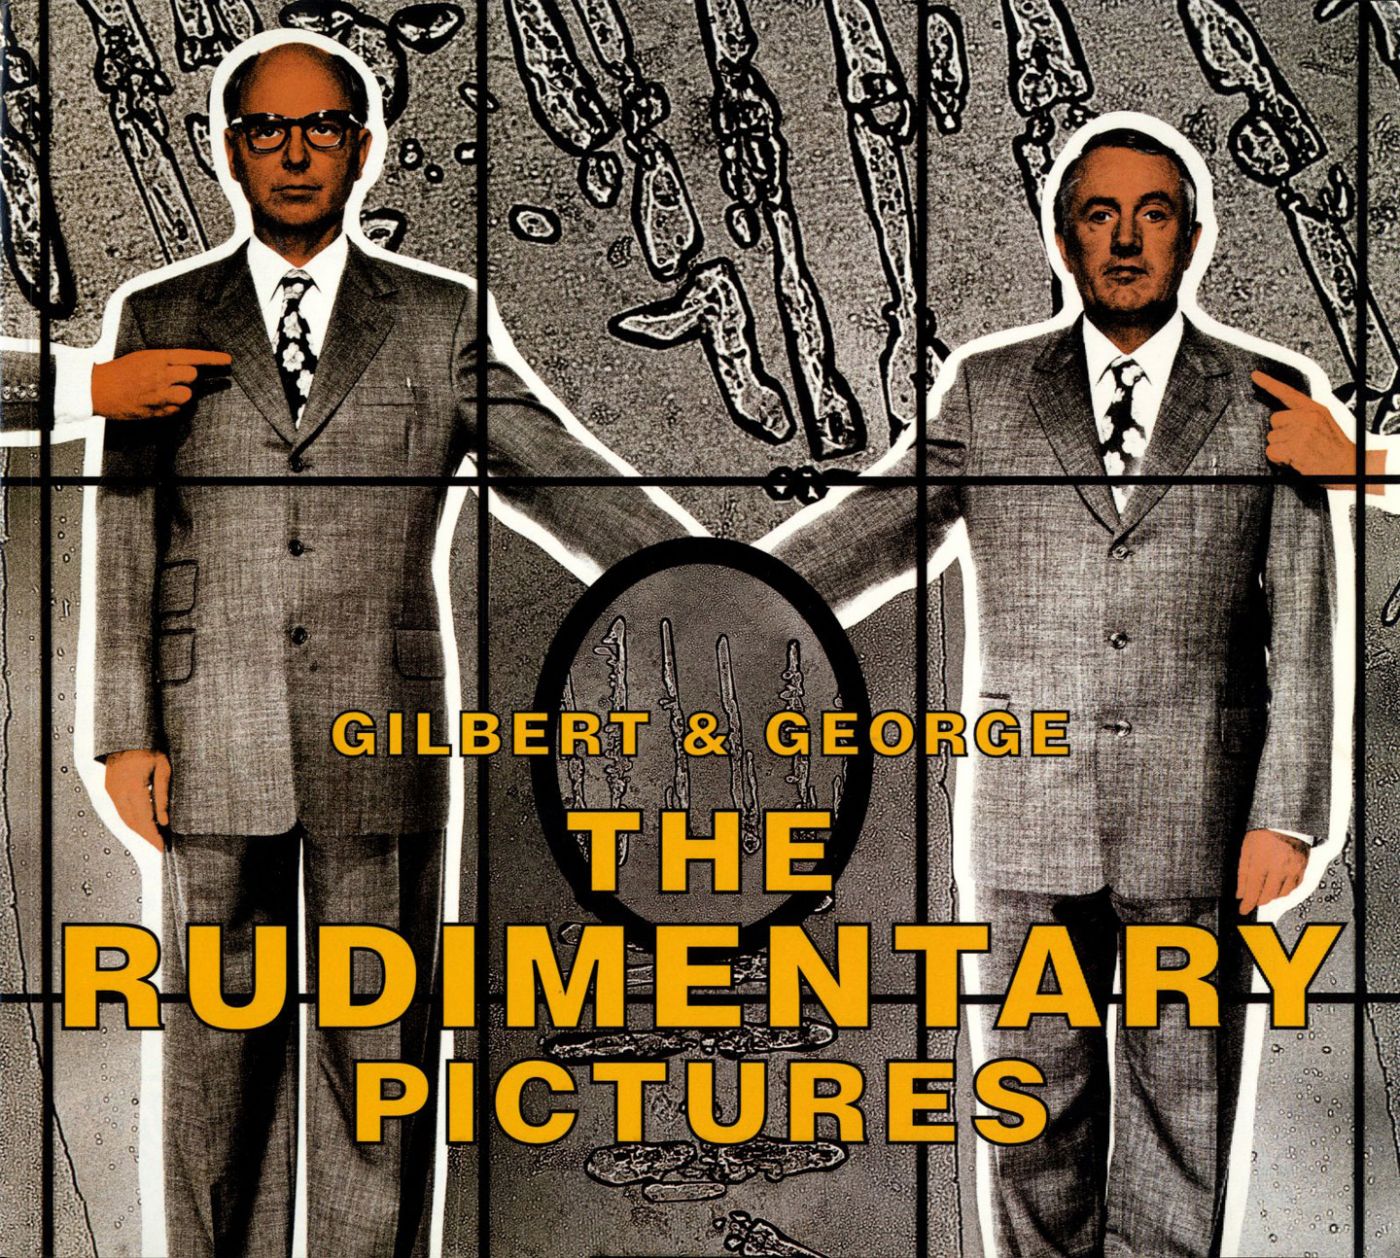 Gilbert & George: The Rudimentary Pictures